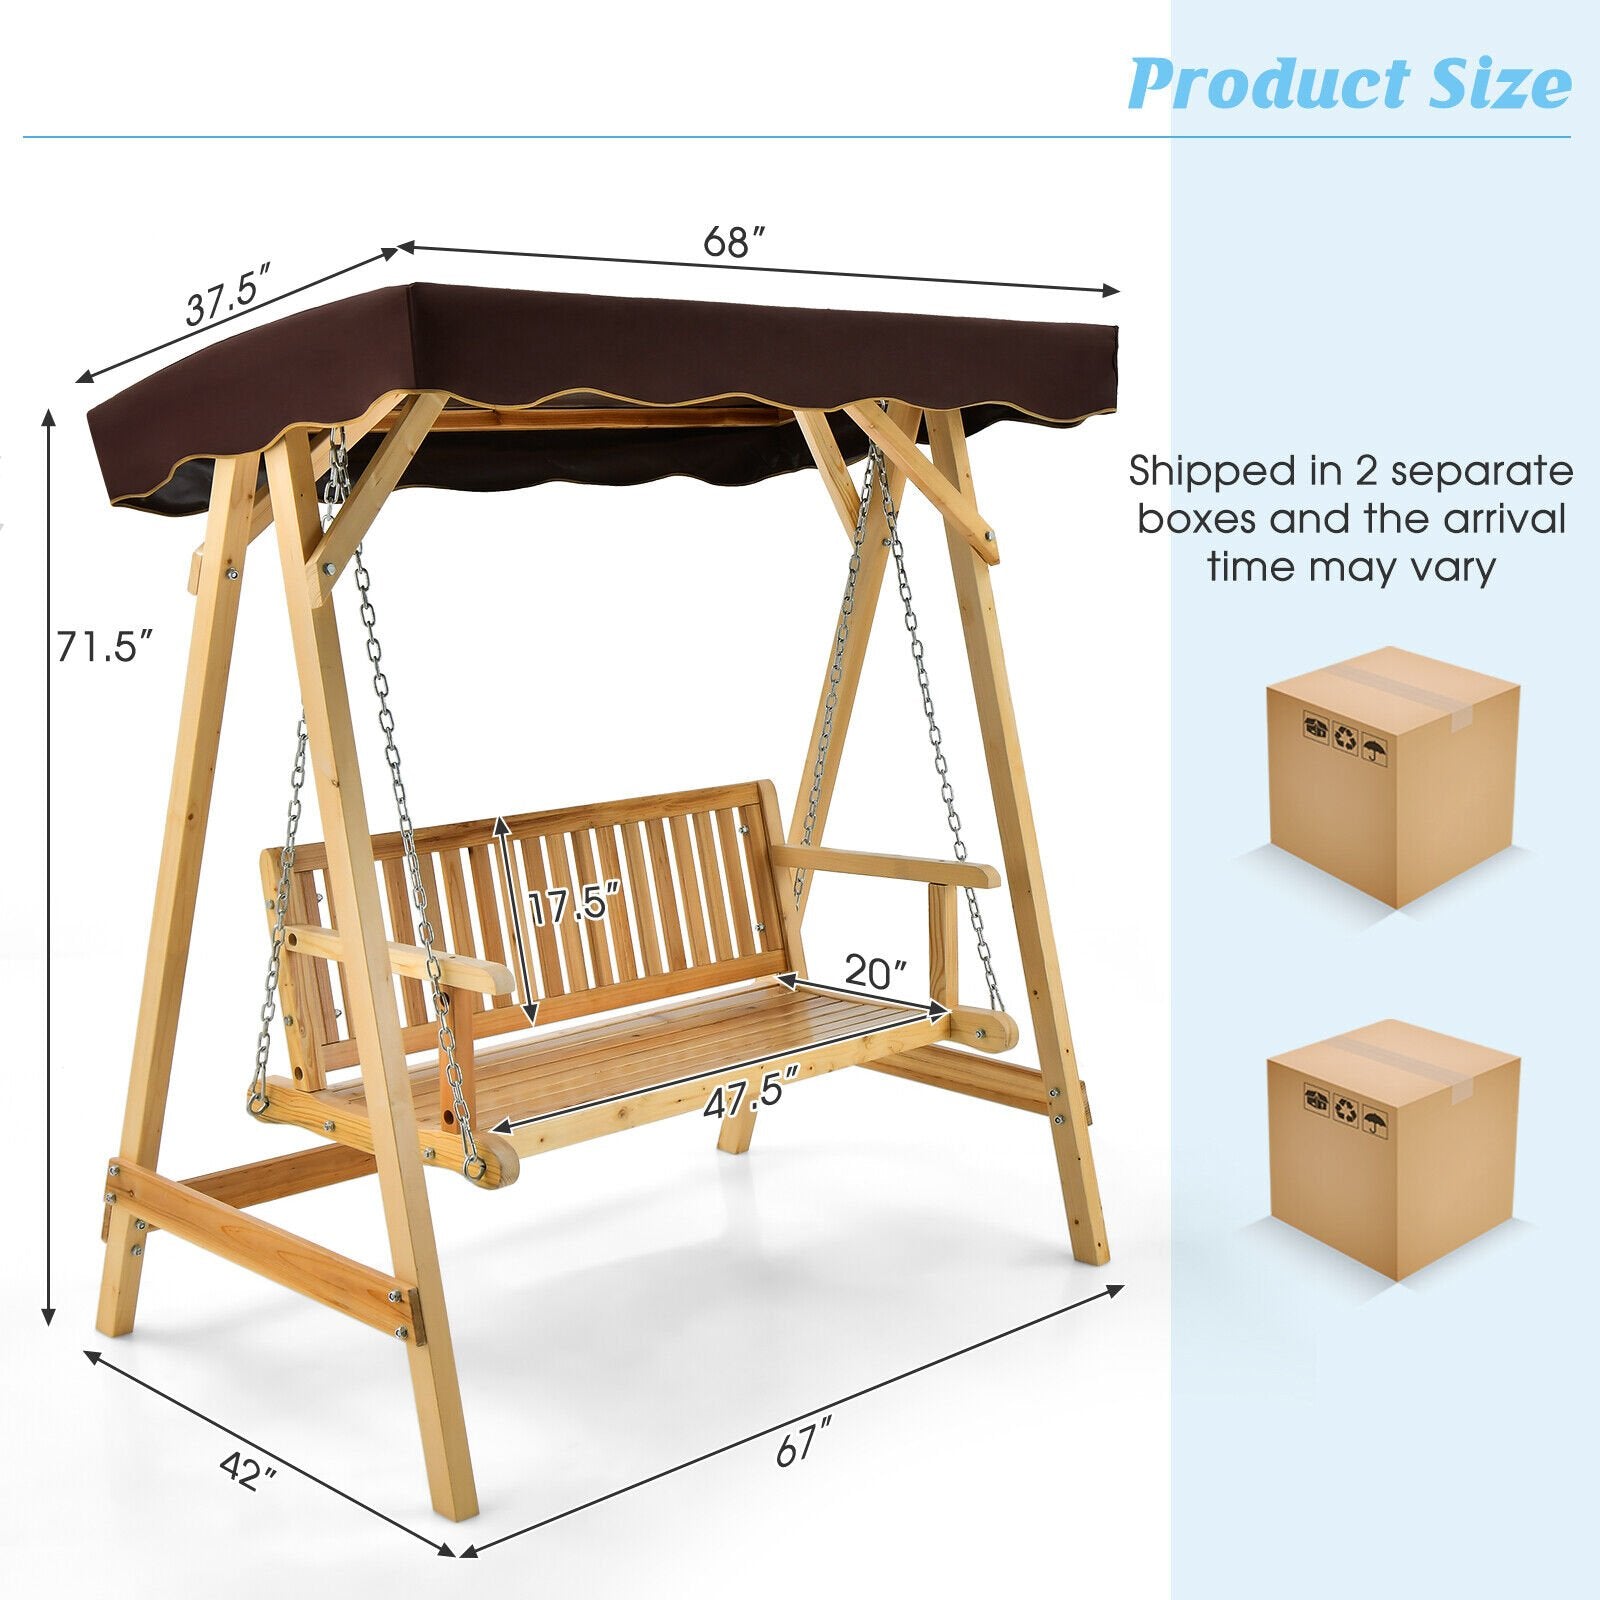 Patio Wooden Swing Bench Chair with Adjustable Canopy for 2 Persons, Natural - Gallery Canada